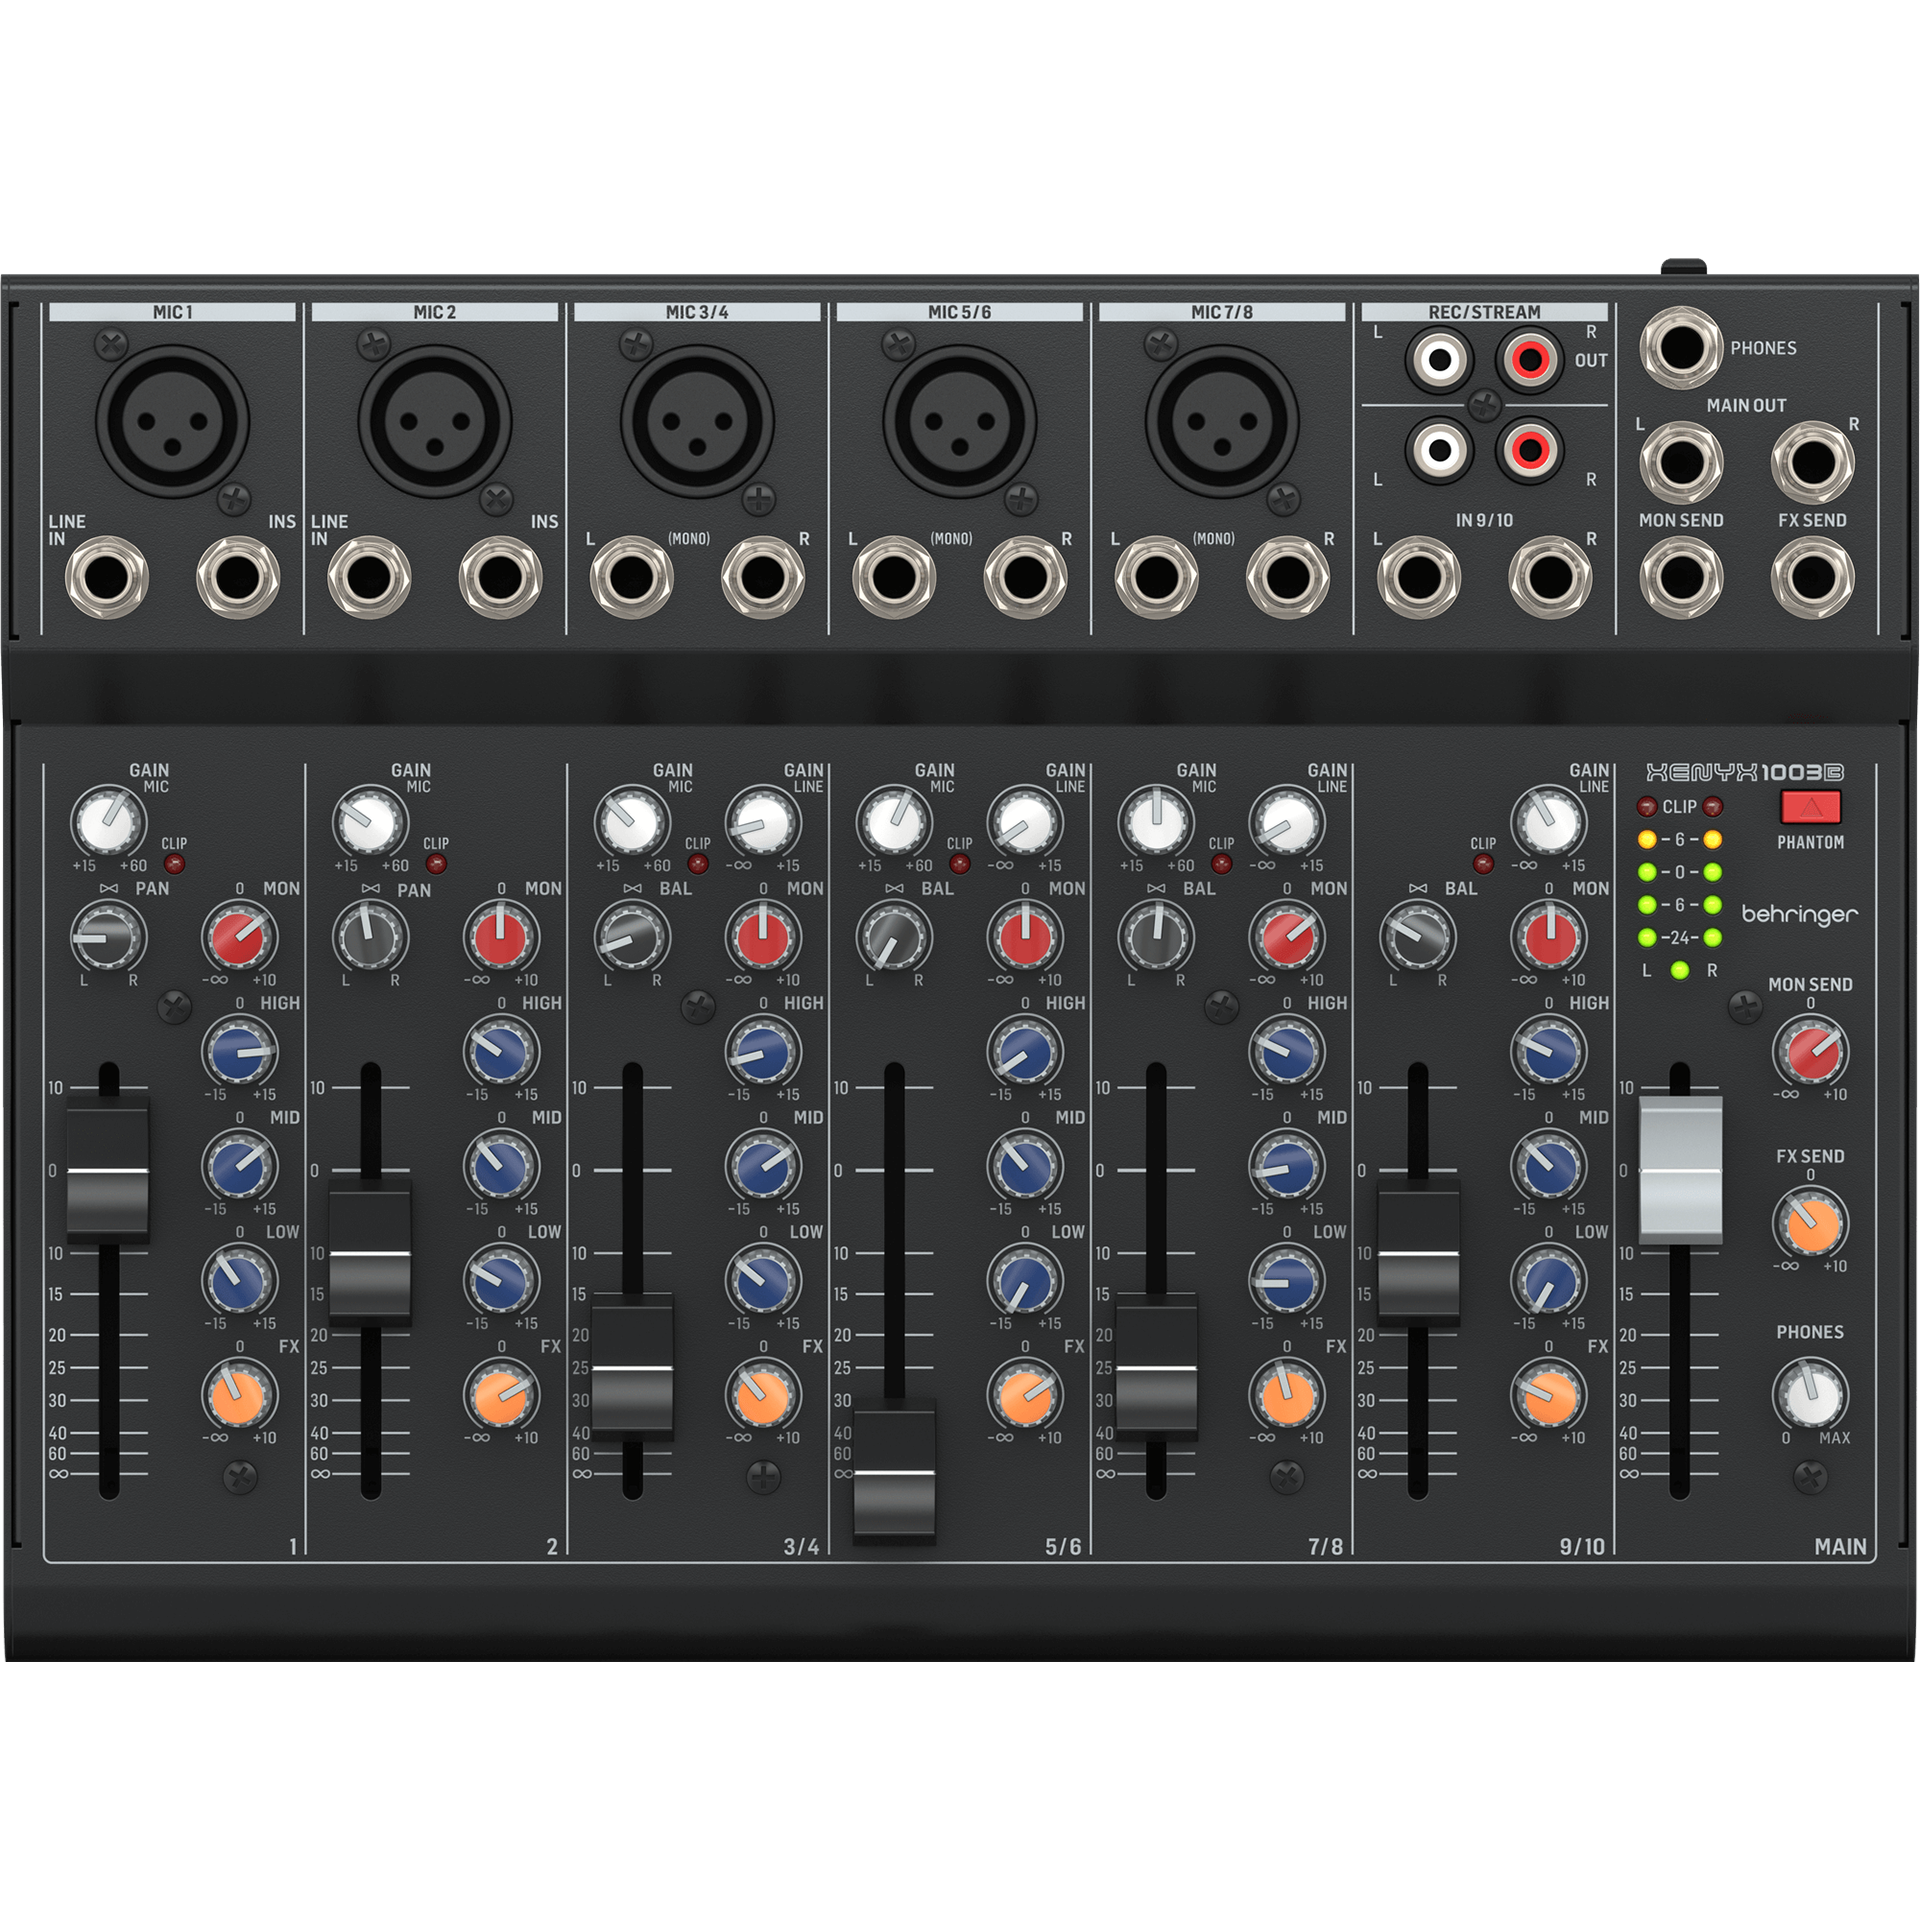 Behringer Xenyx 1003B Premium Analog Mixer with 5 Mic Preamps